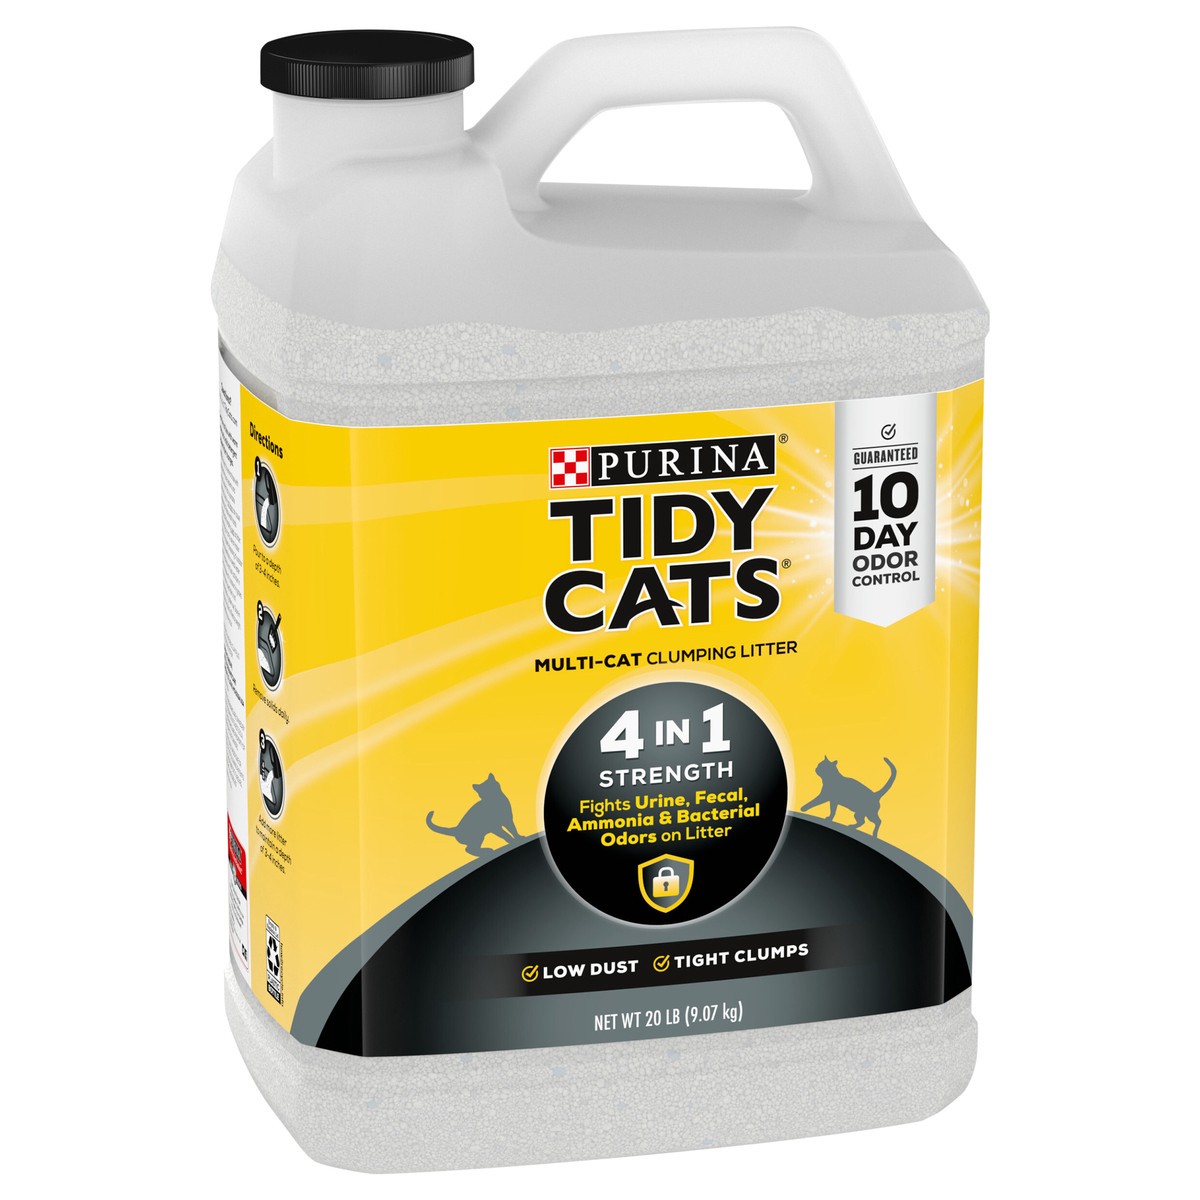 slide 9 of 9, Tidy Cats Purina Tidy Cats 4-in-1 Strength Multi-Cat Clumping Litter - 20lbs, 20 lb